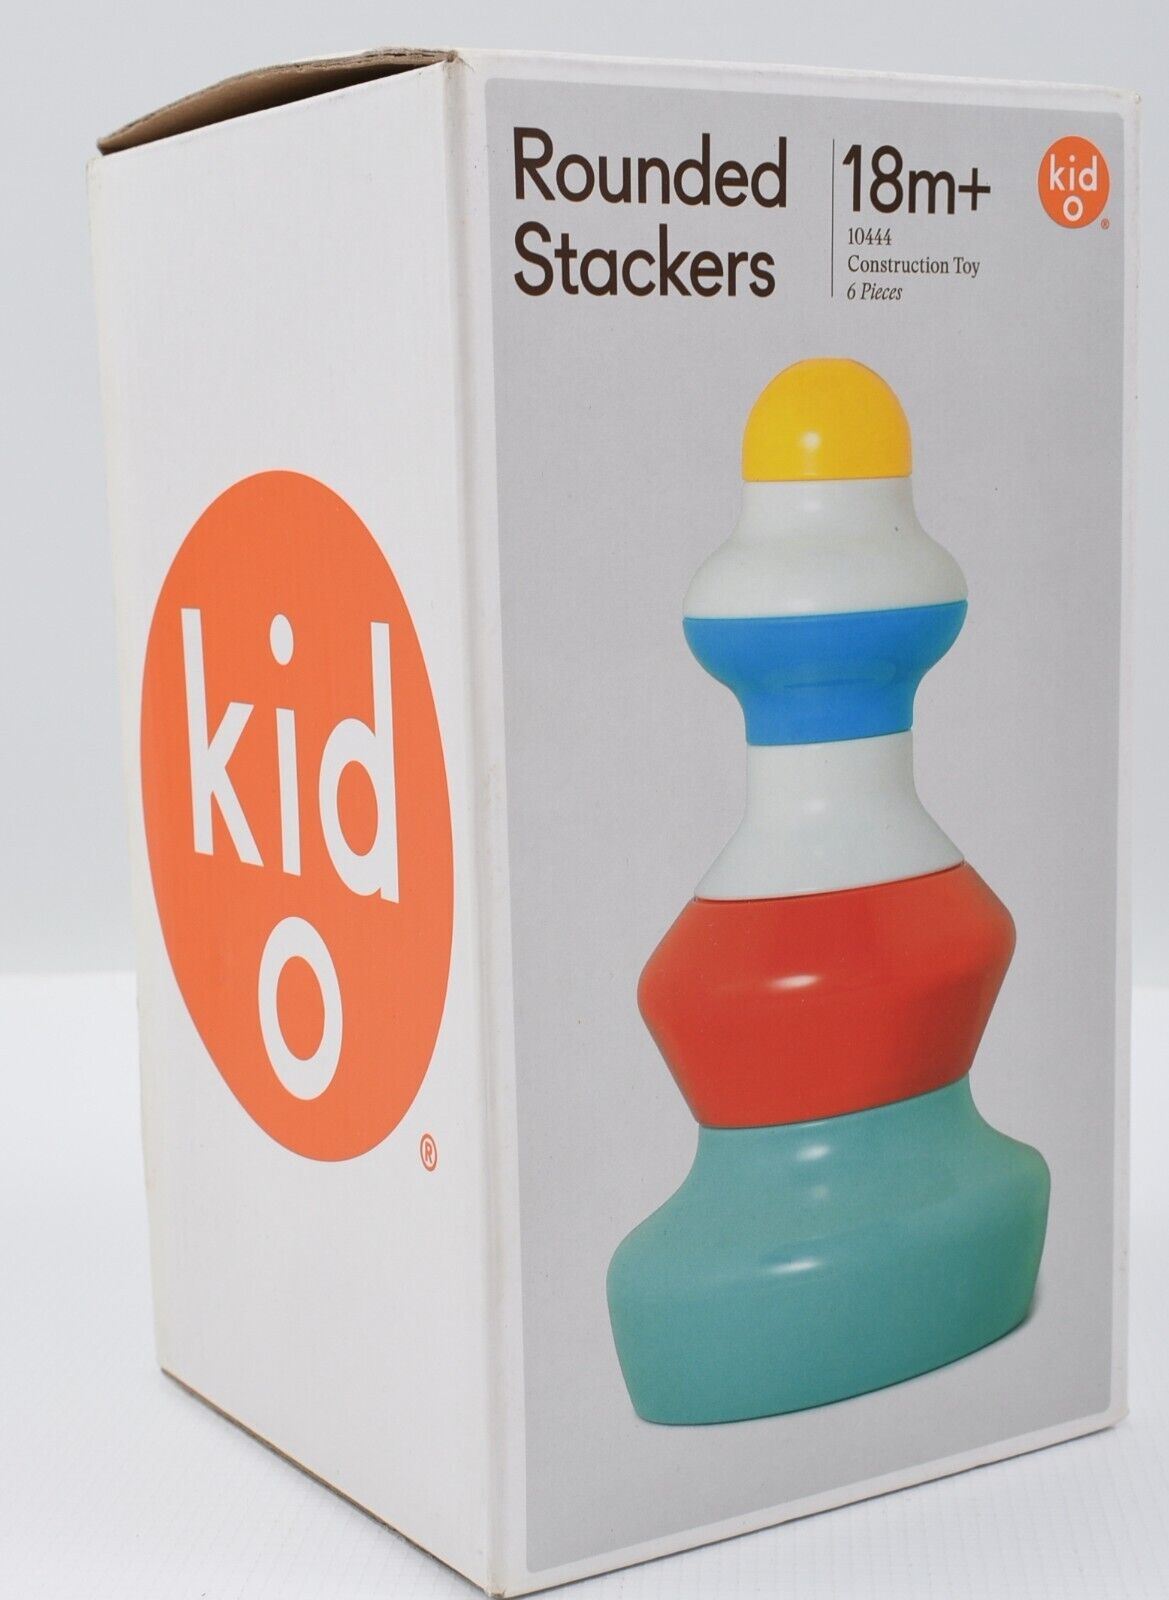 KID O Rounded Stackers, 6 Piece Colourful Construction Toy, 18+ months